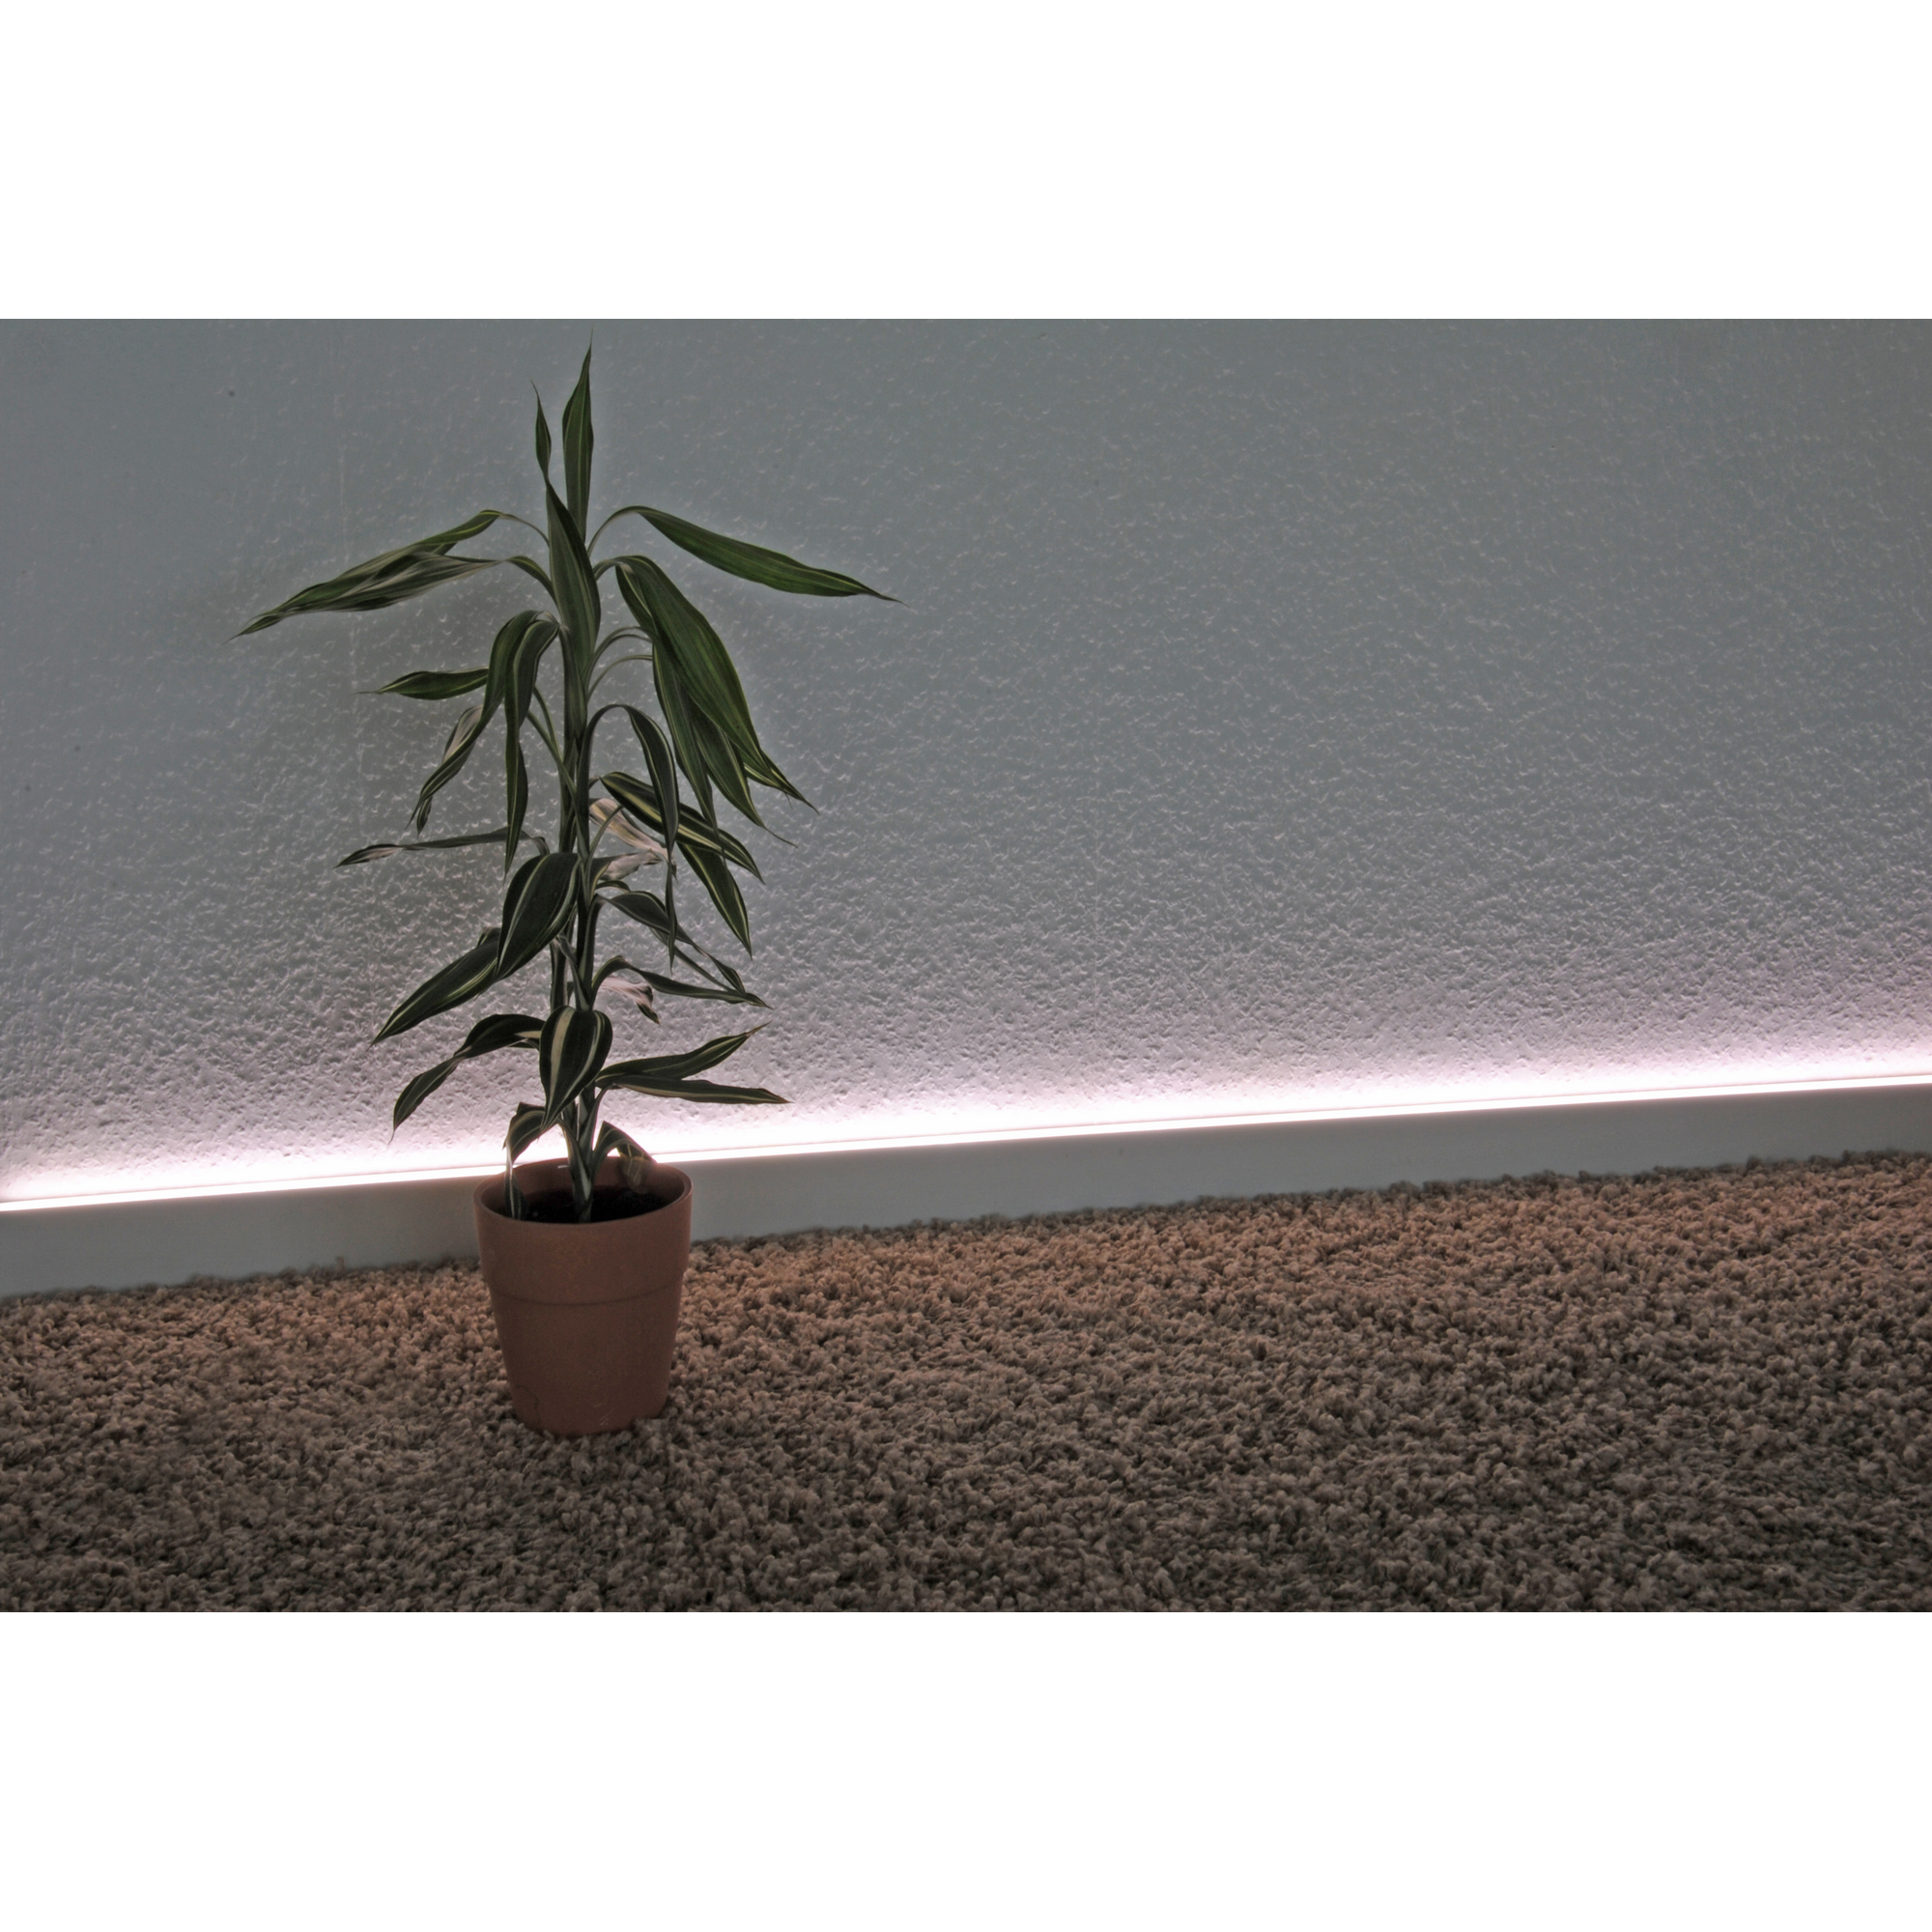 LED-Sockelleiste mit Diffuser Uni Weiß 2500 x 70 x 19 mm + product picture